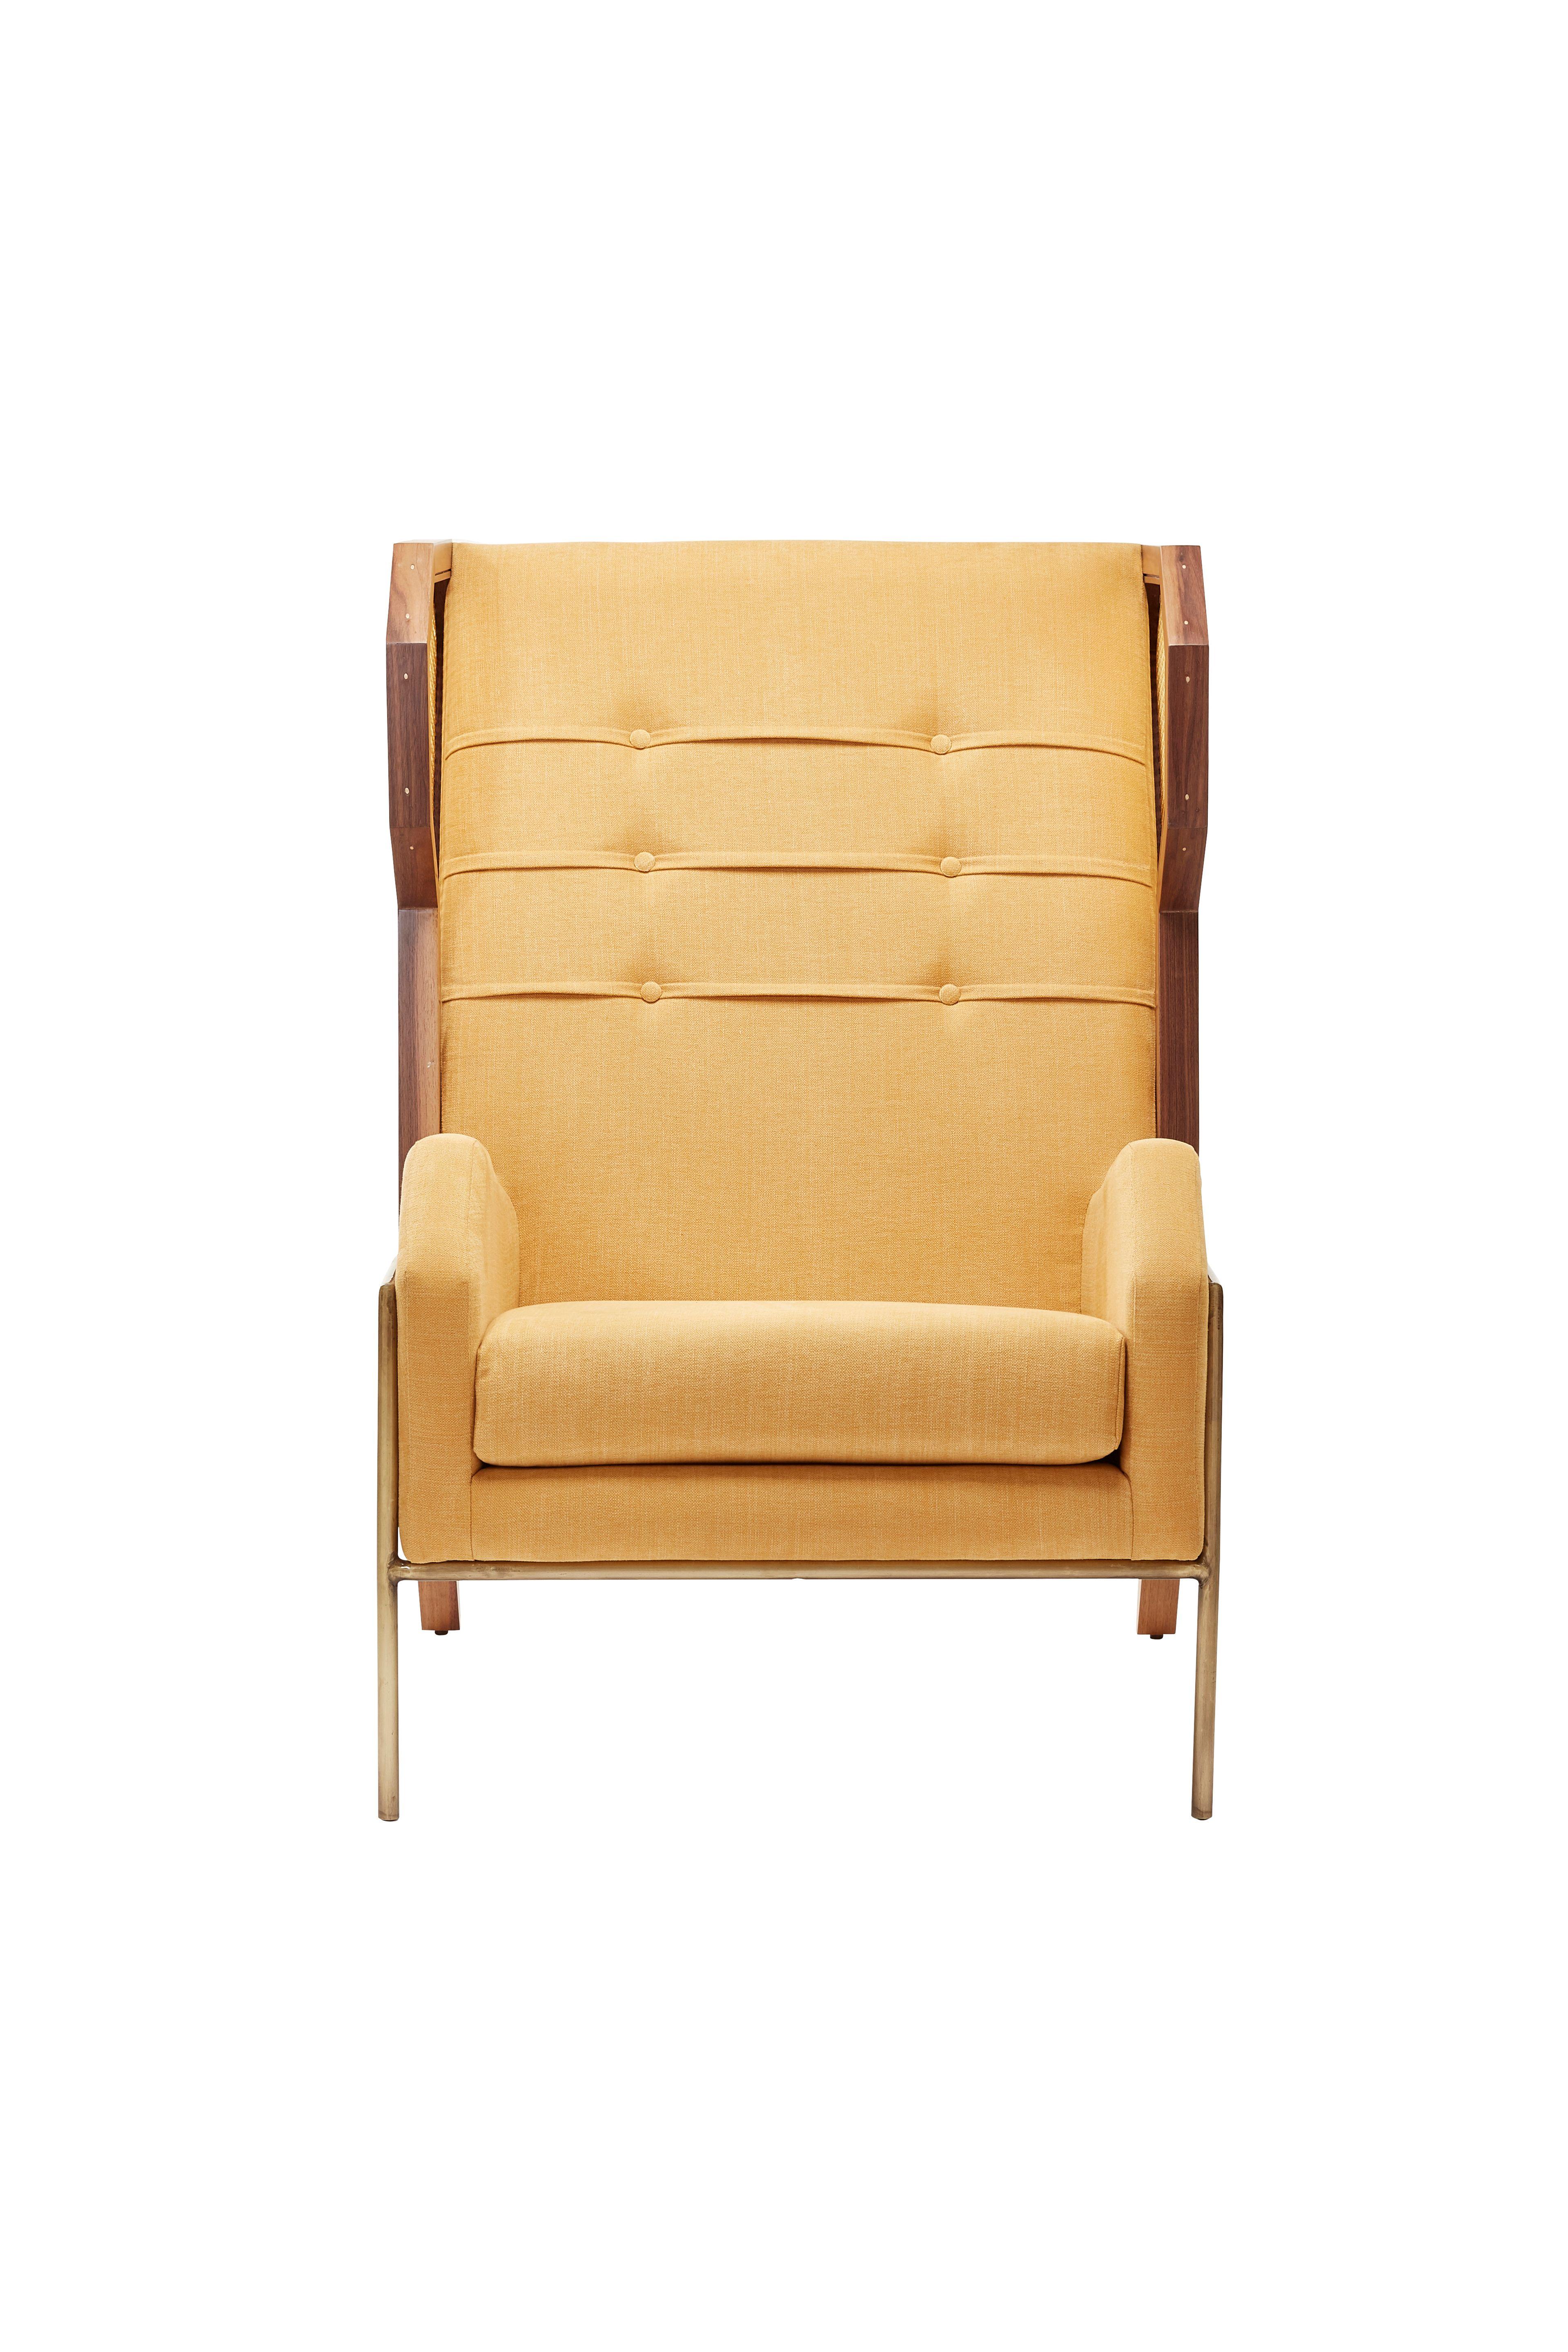 South African Livingston Wingback by Egg Designs For Sale